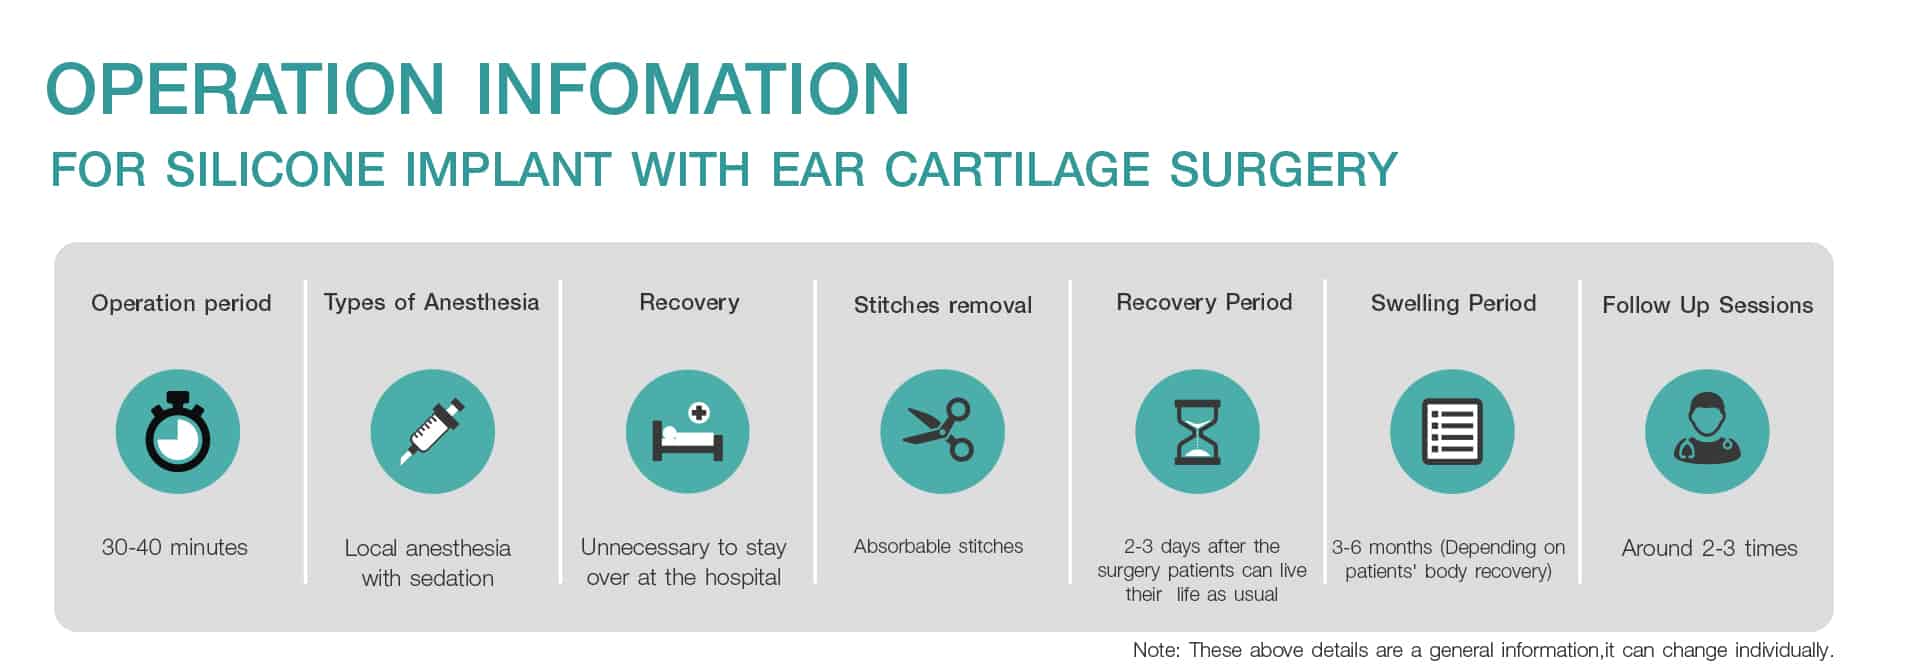 Operation Information for silicone implant with ear cartilage surgery